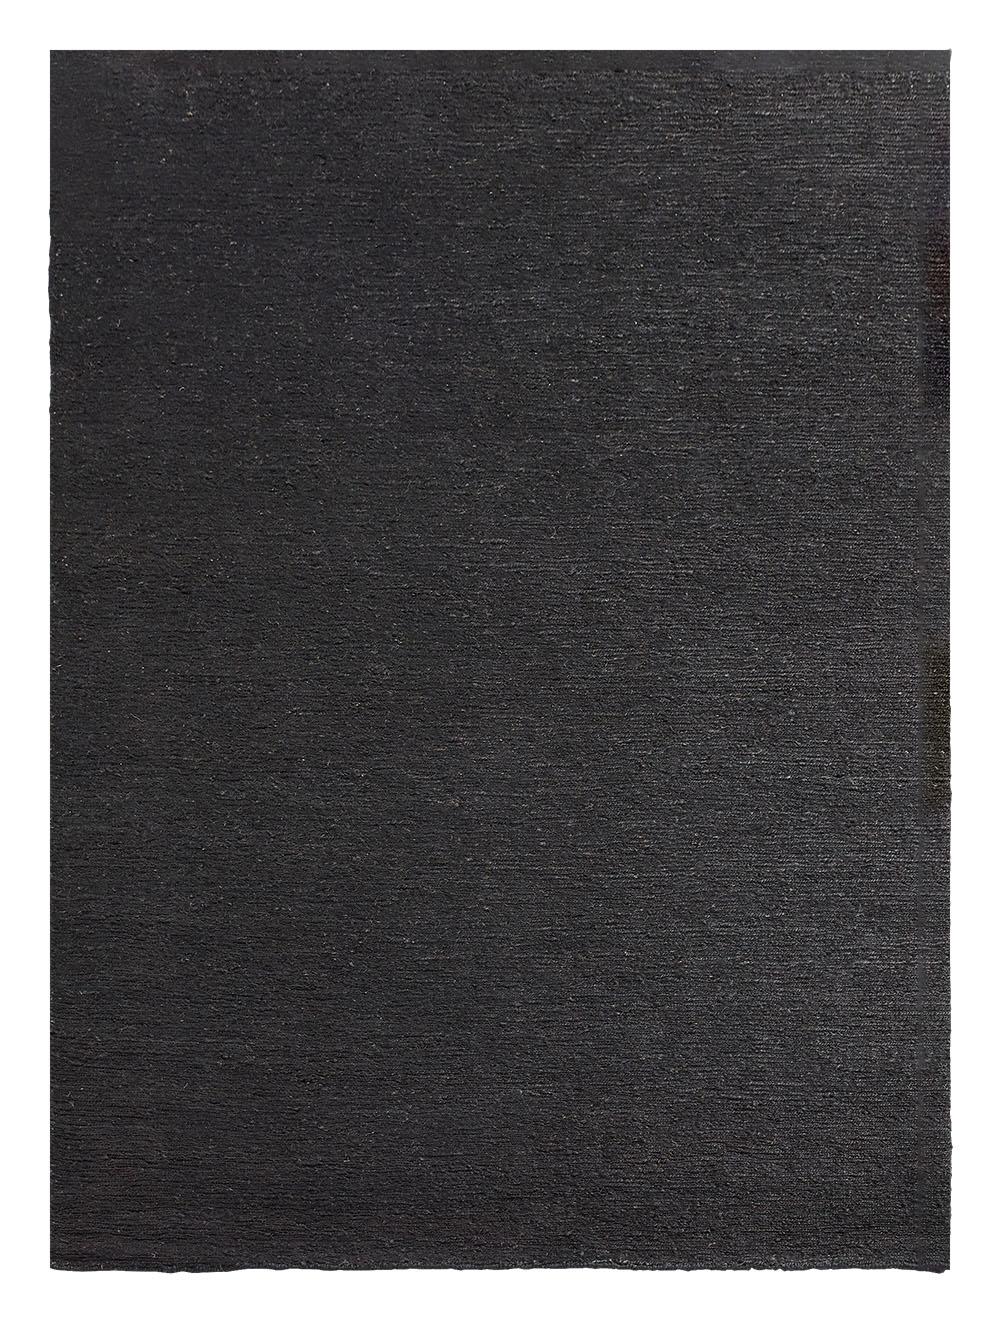 Black sumace carpet by Massimo Copenhagen.
Handknotted.
Materials: 100% Hemp.
Dimensions: W 250 x H 300 cm.
Available colors: Natural, natural with fringes, black, black with fringes, and navy.
other.
Other dimensions are available: 170x240